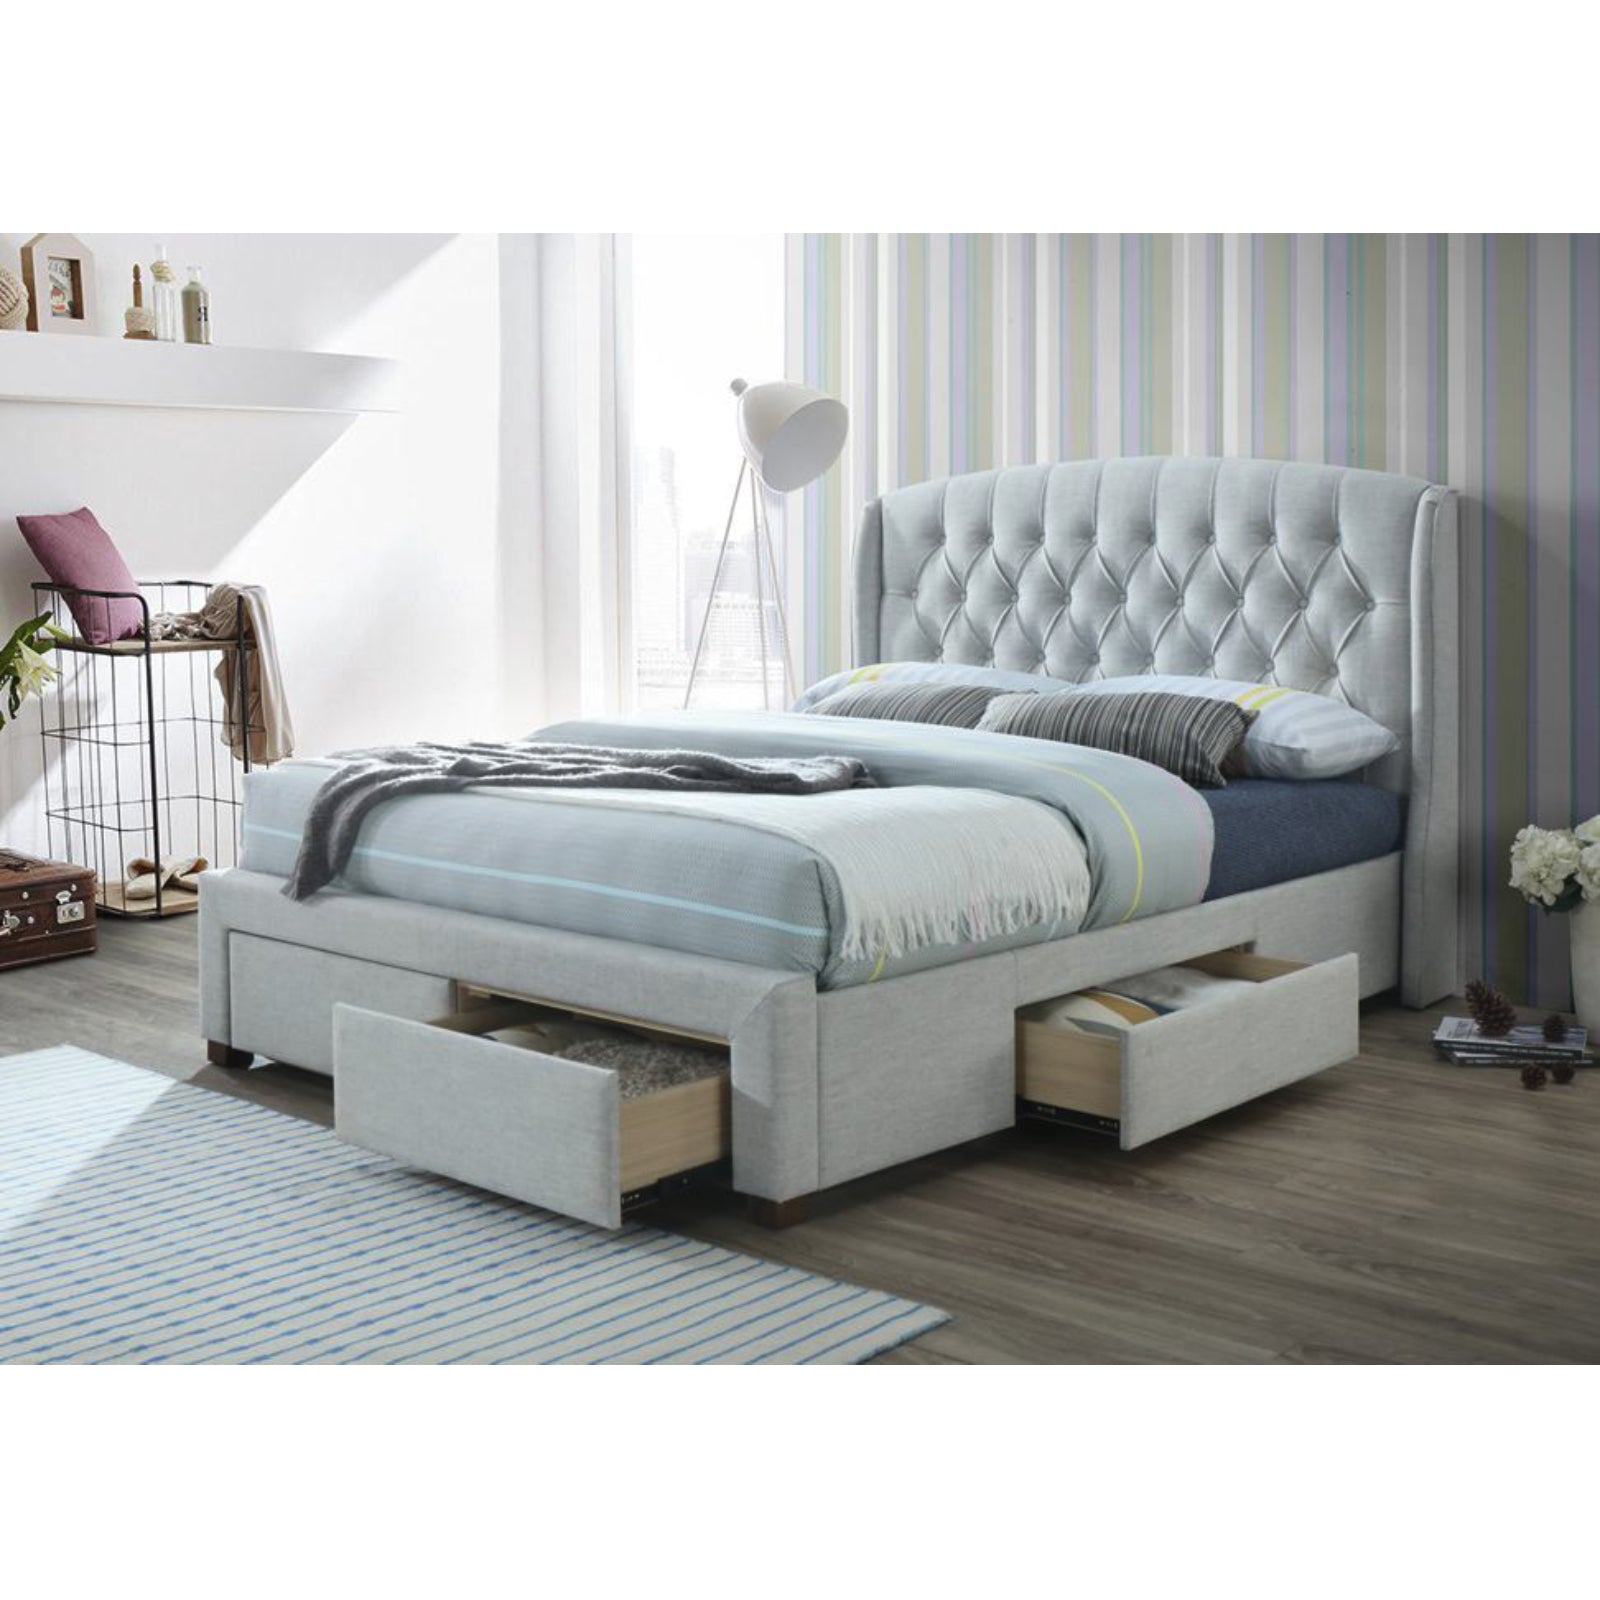 Honeydew Double Size Bed Frame Timber Mattress Base With Storage Drawers - Beige - SILBERSHELL